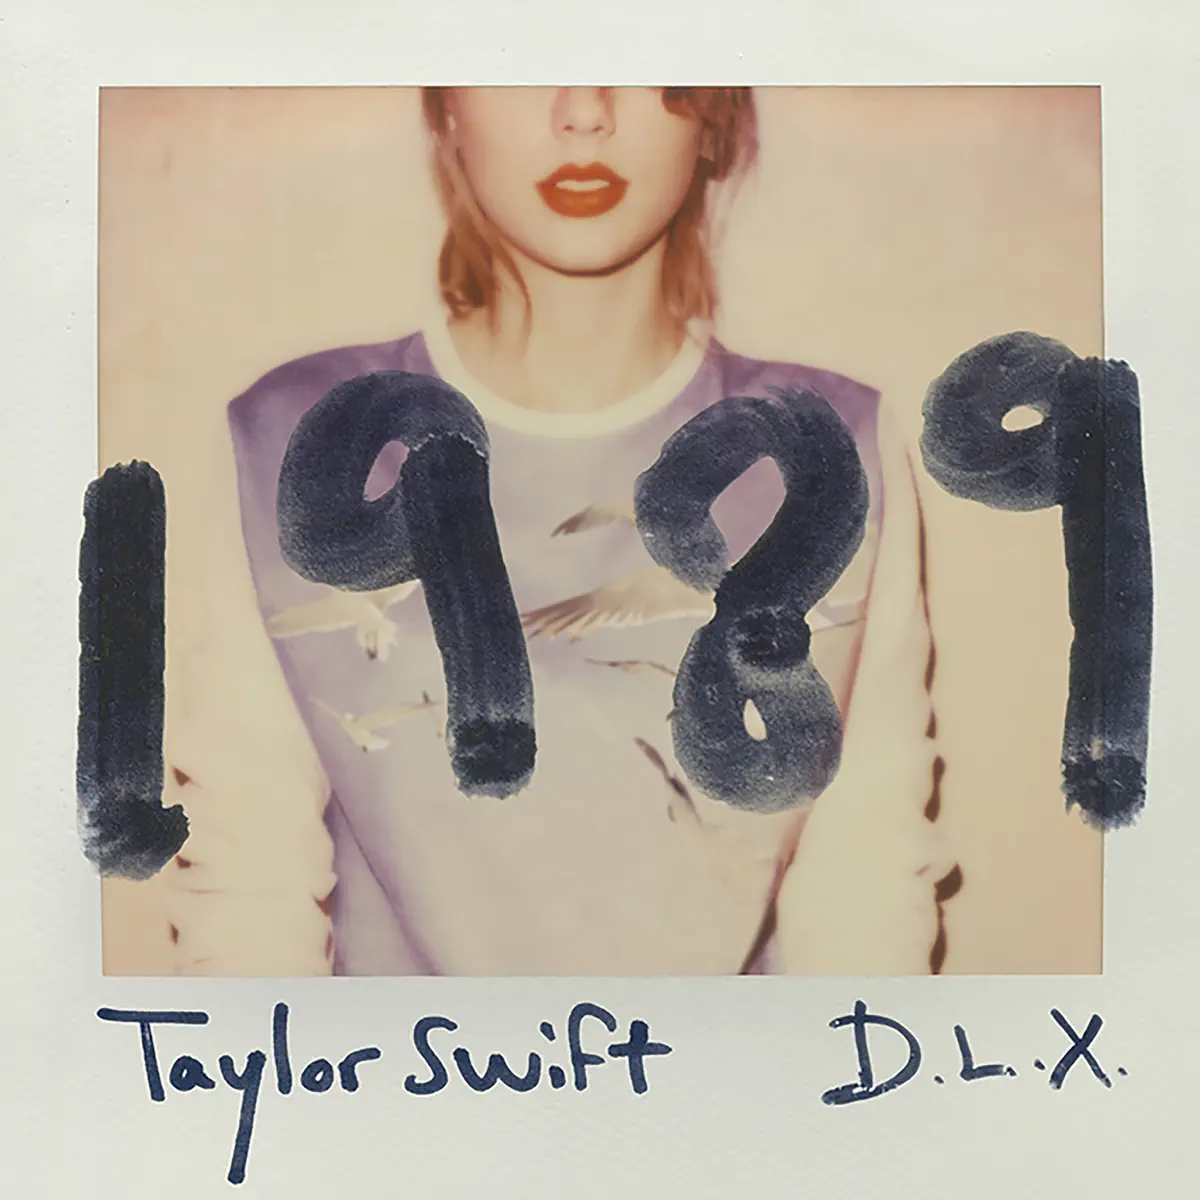 Taylor Swift - 1989 (Deluxe Edition) (2014) [iTunes Plus AAC M4A]-新房子